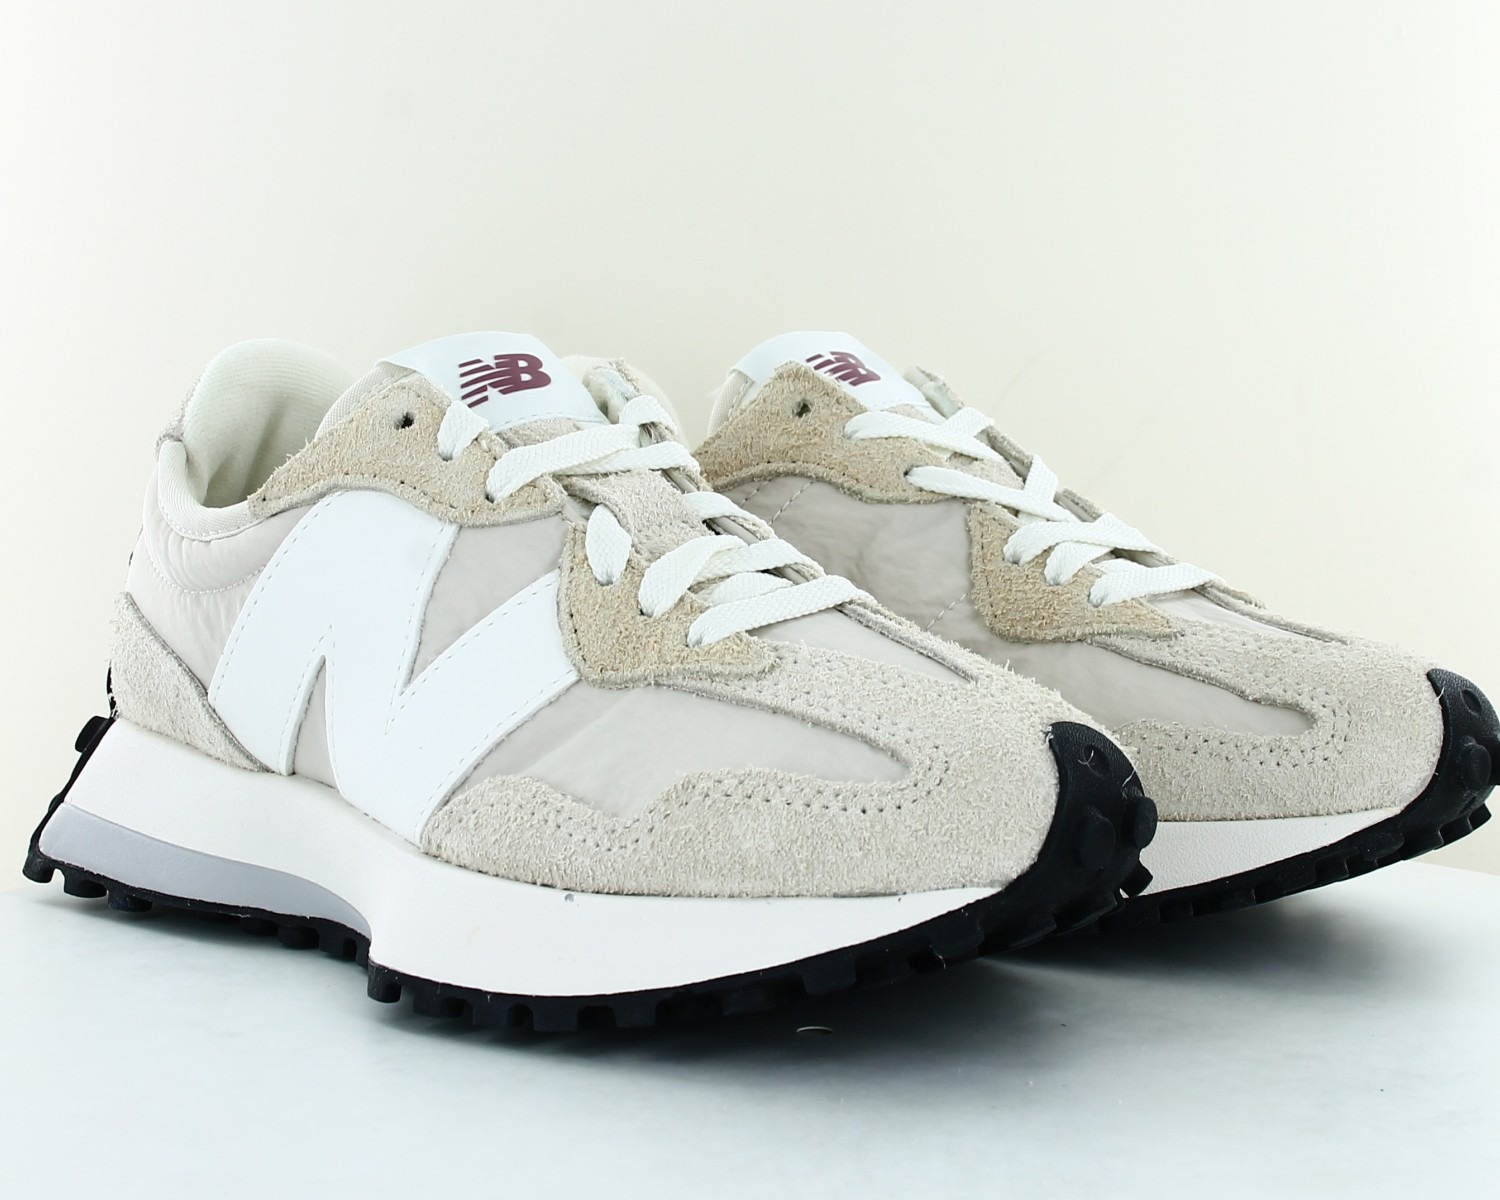 New Balance 327 Beige - Free delivery